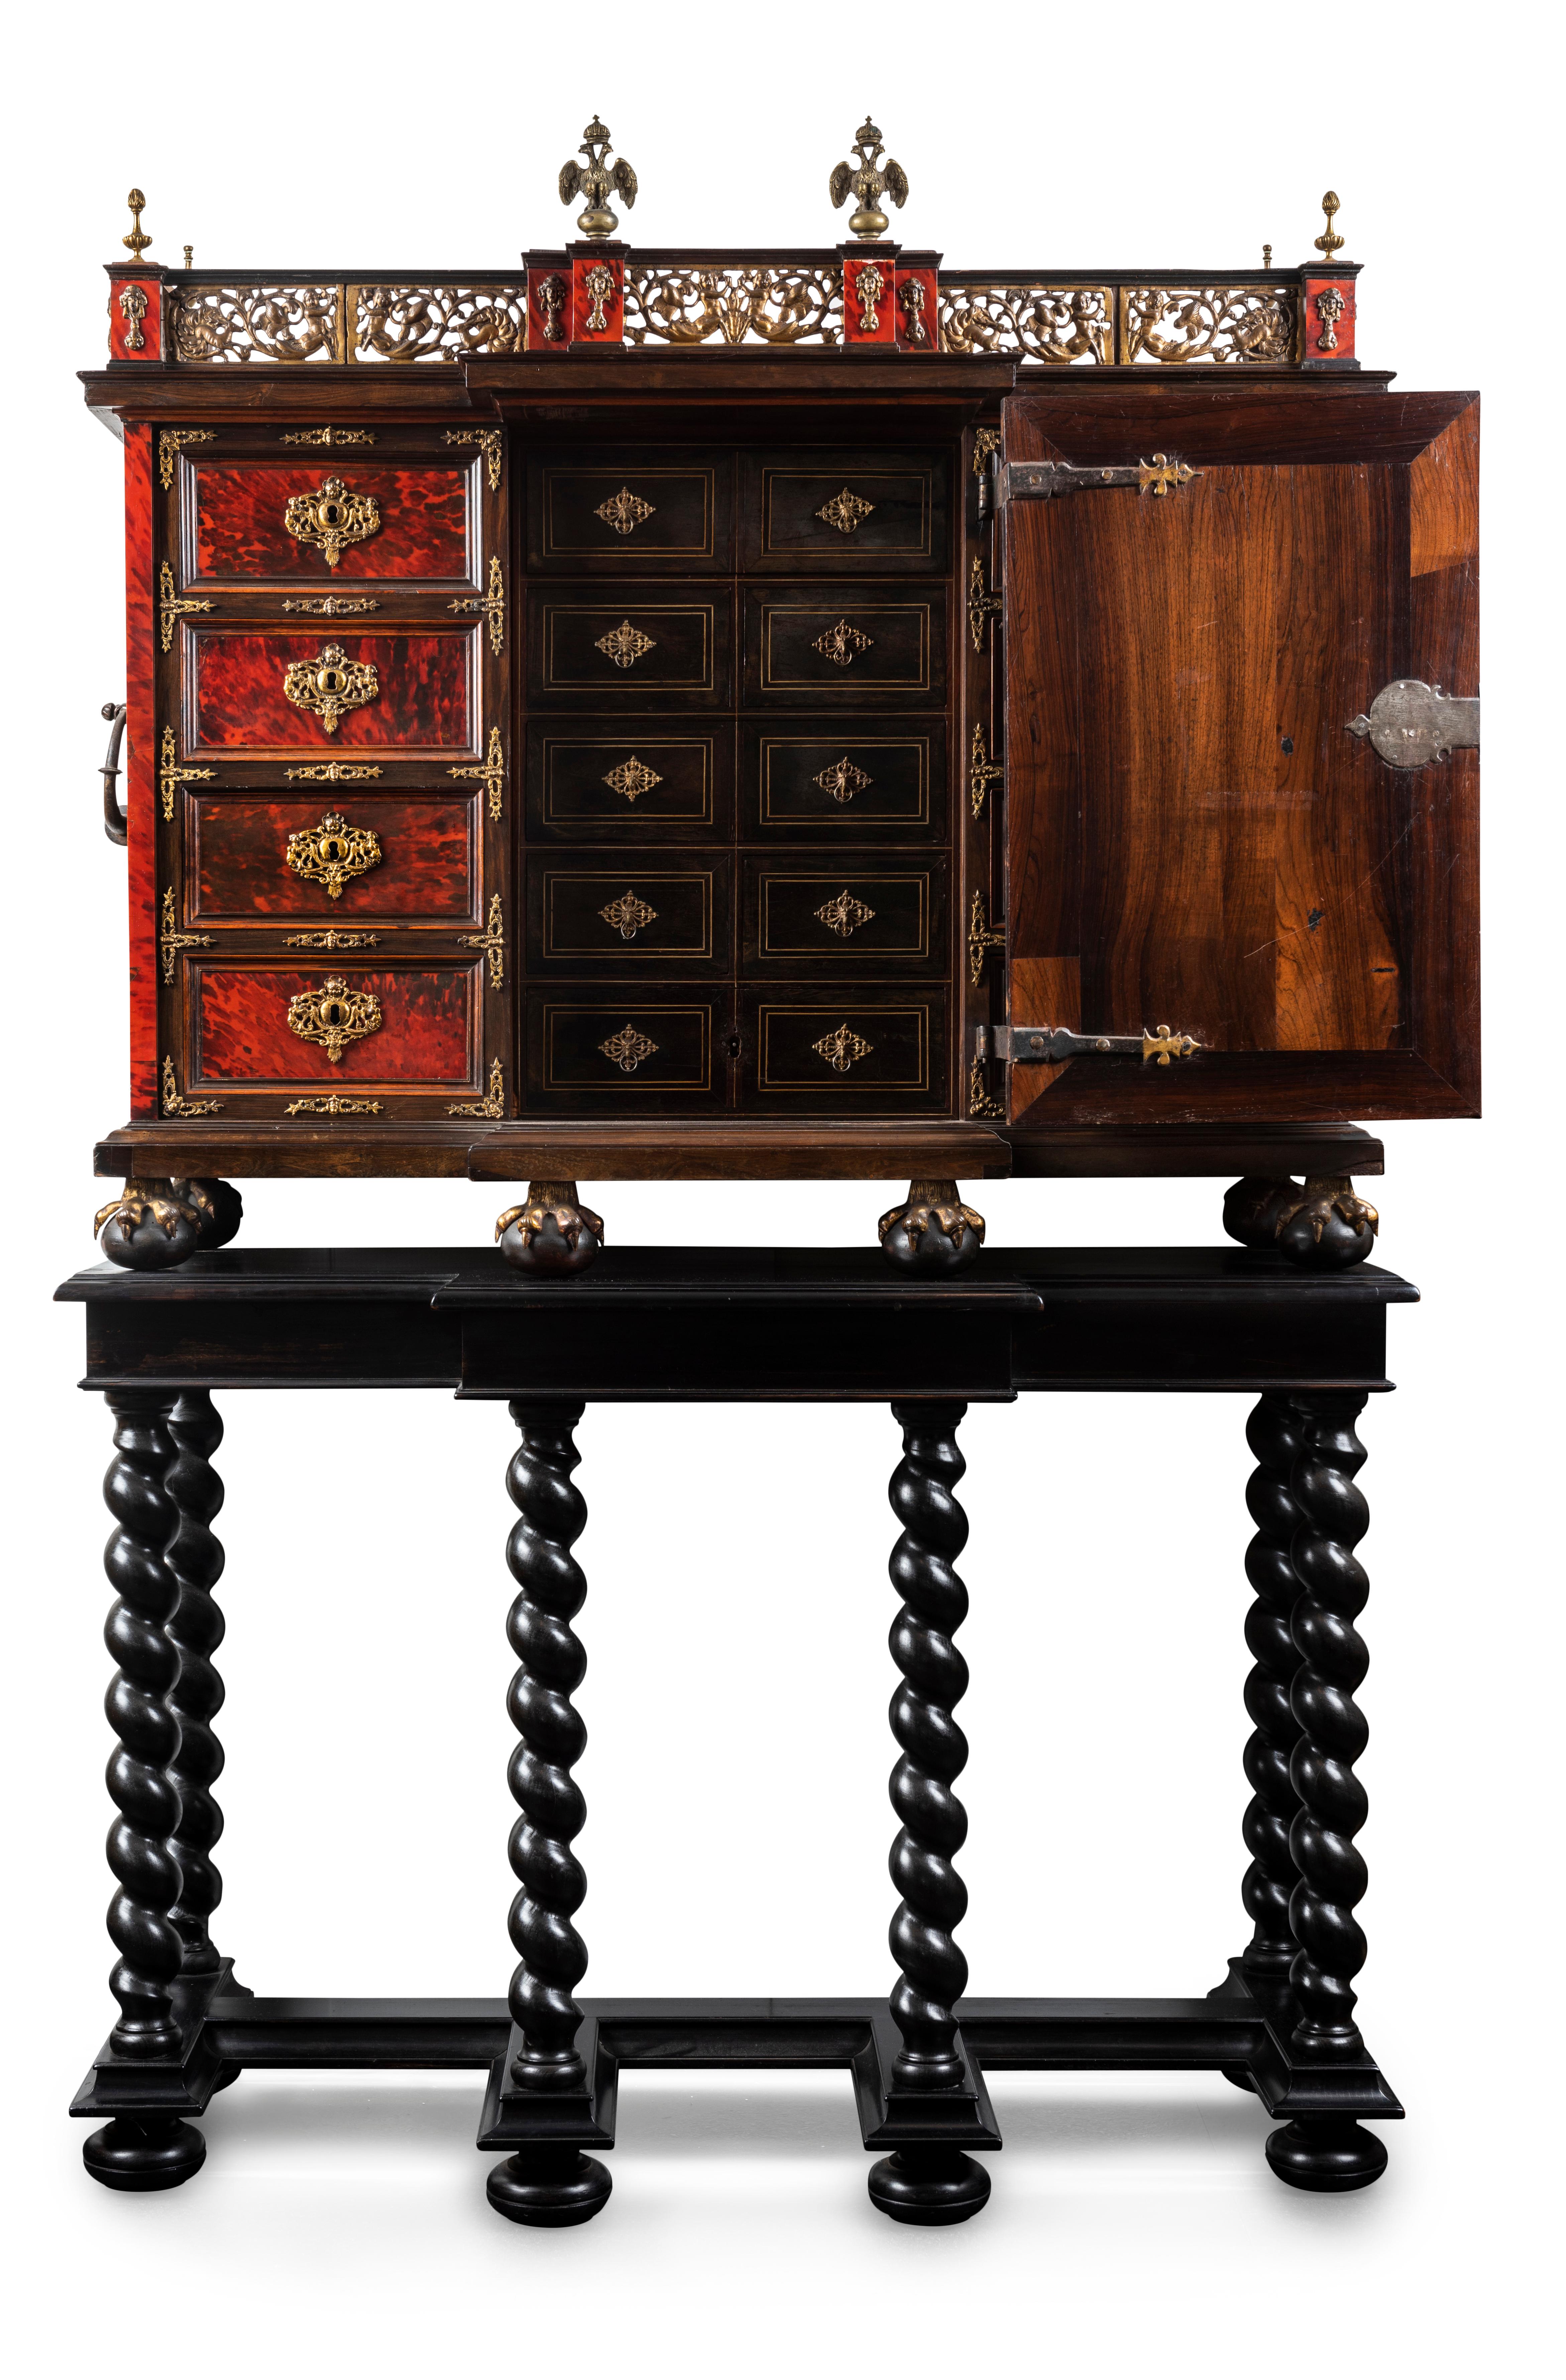 The cabinet of rectangular form with a break front palisander body enlivened with re tortoiseshell and separated into three sections, the central section with the double pilasters each ornamented with pendant gilt grass grotesques framing a putto